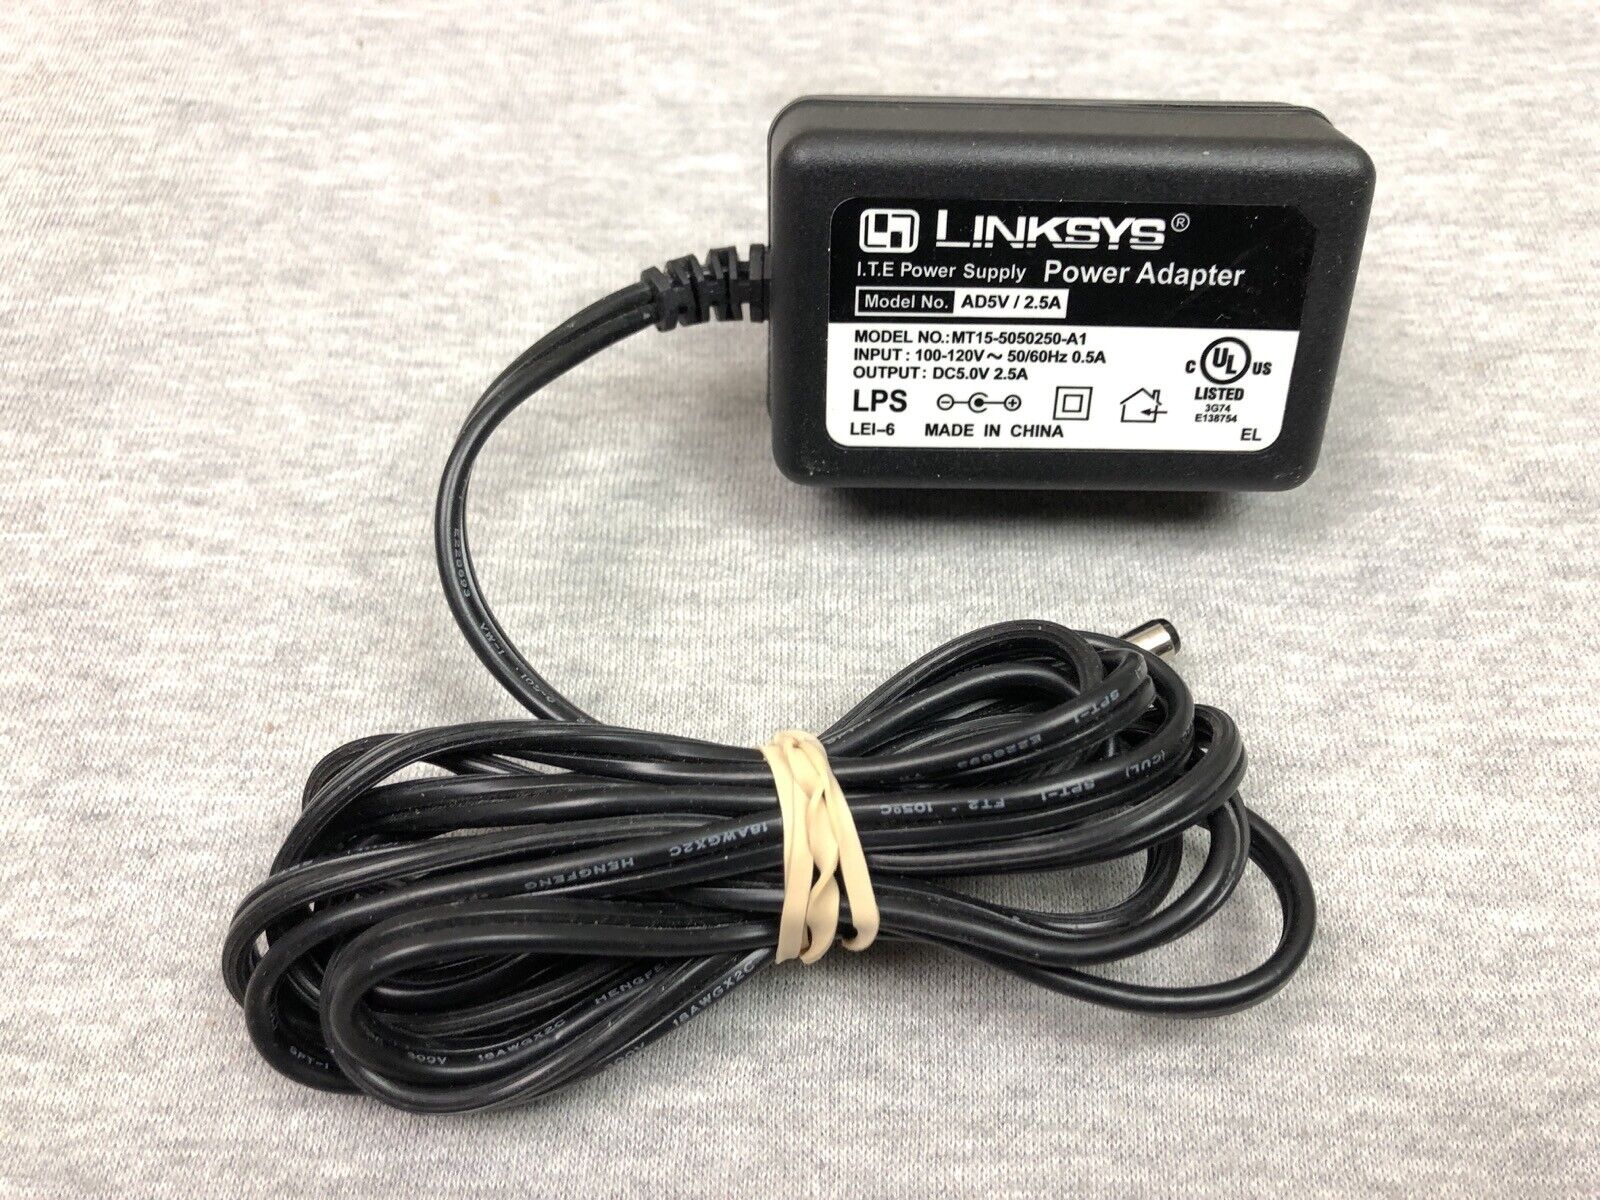 Linksys AD5V AC Adapter Output DC 5V 2.5A Power Supply Brand: Linksys Type: AC/DC Adapter UPC: Does not apply Outpu - Click Image to Close